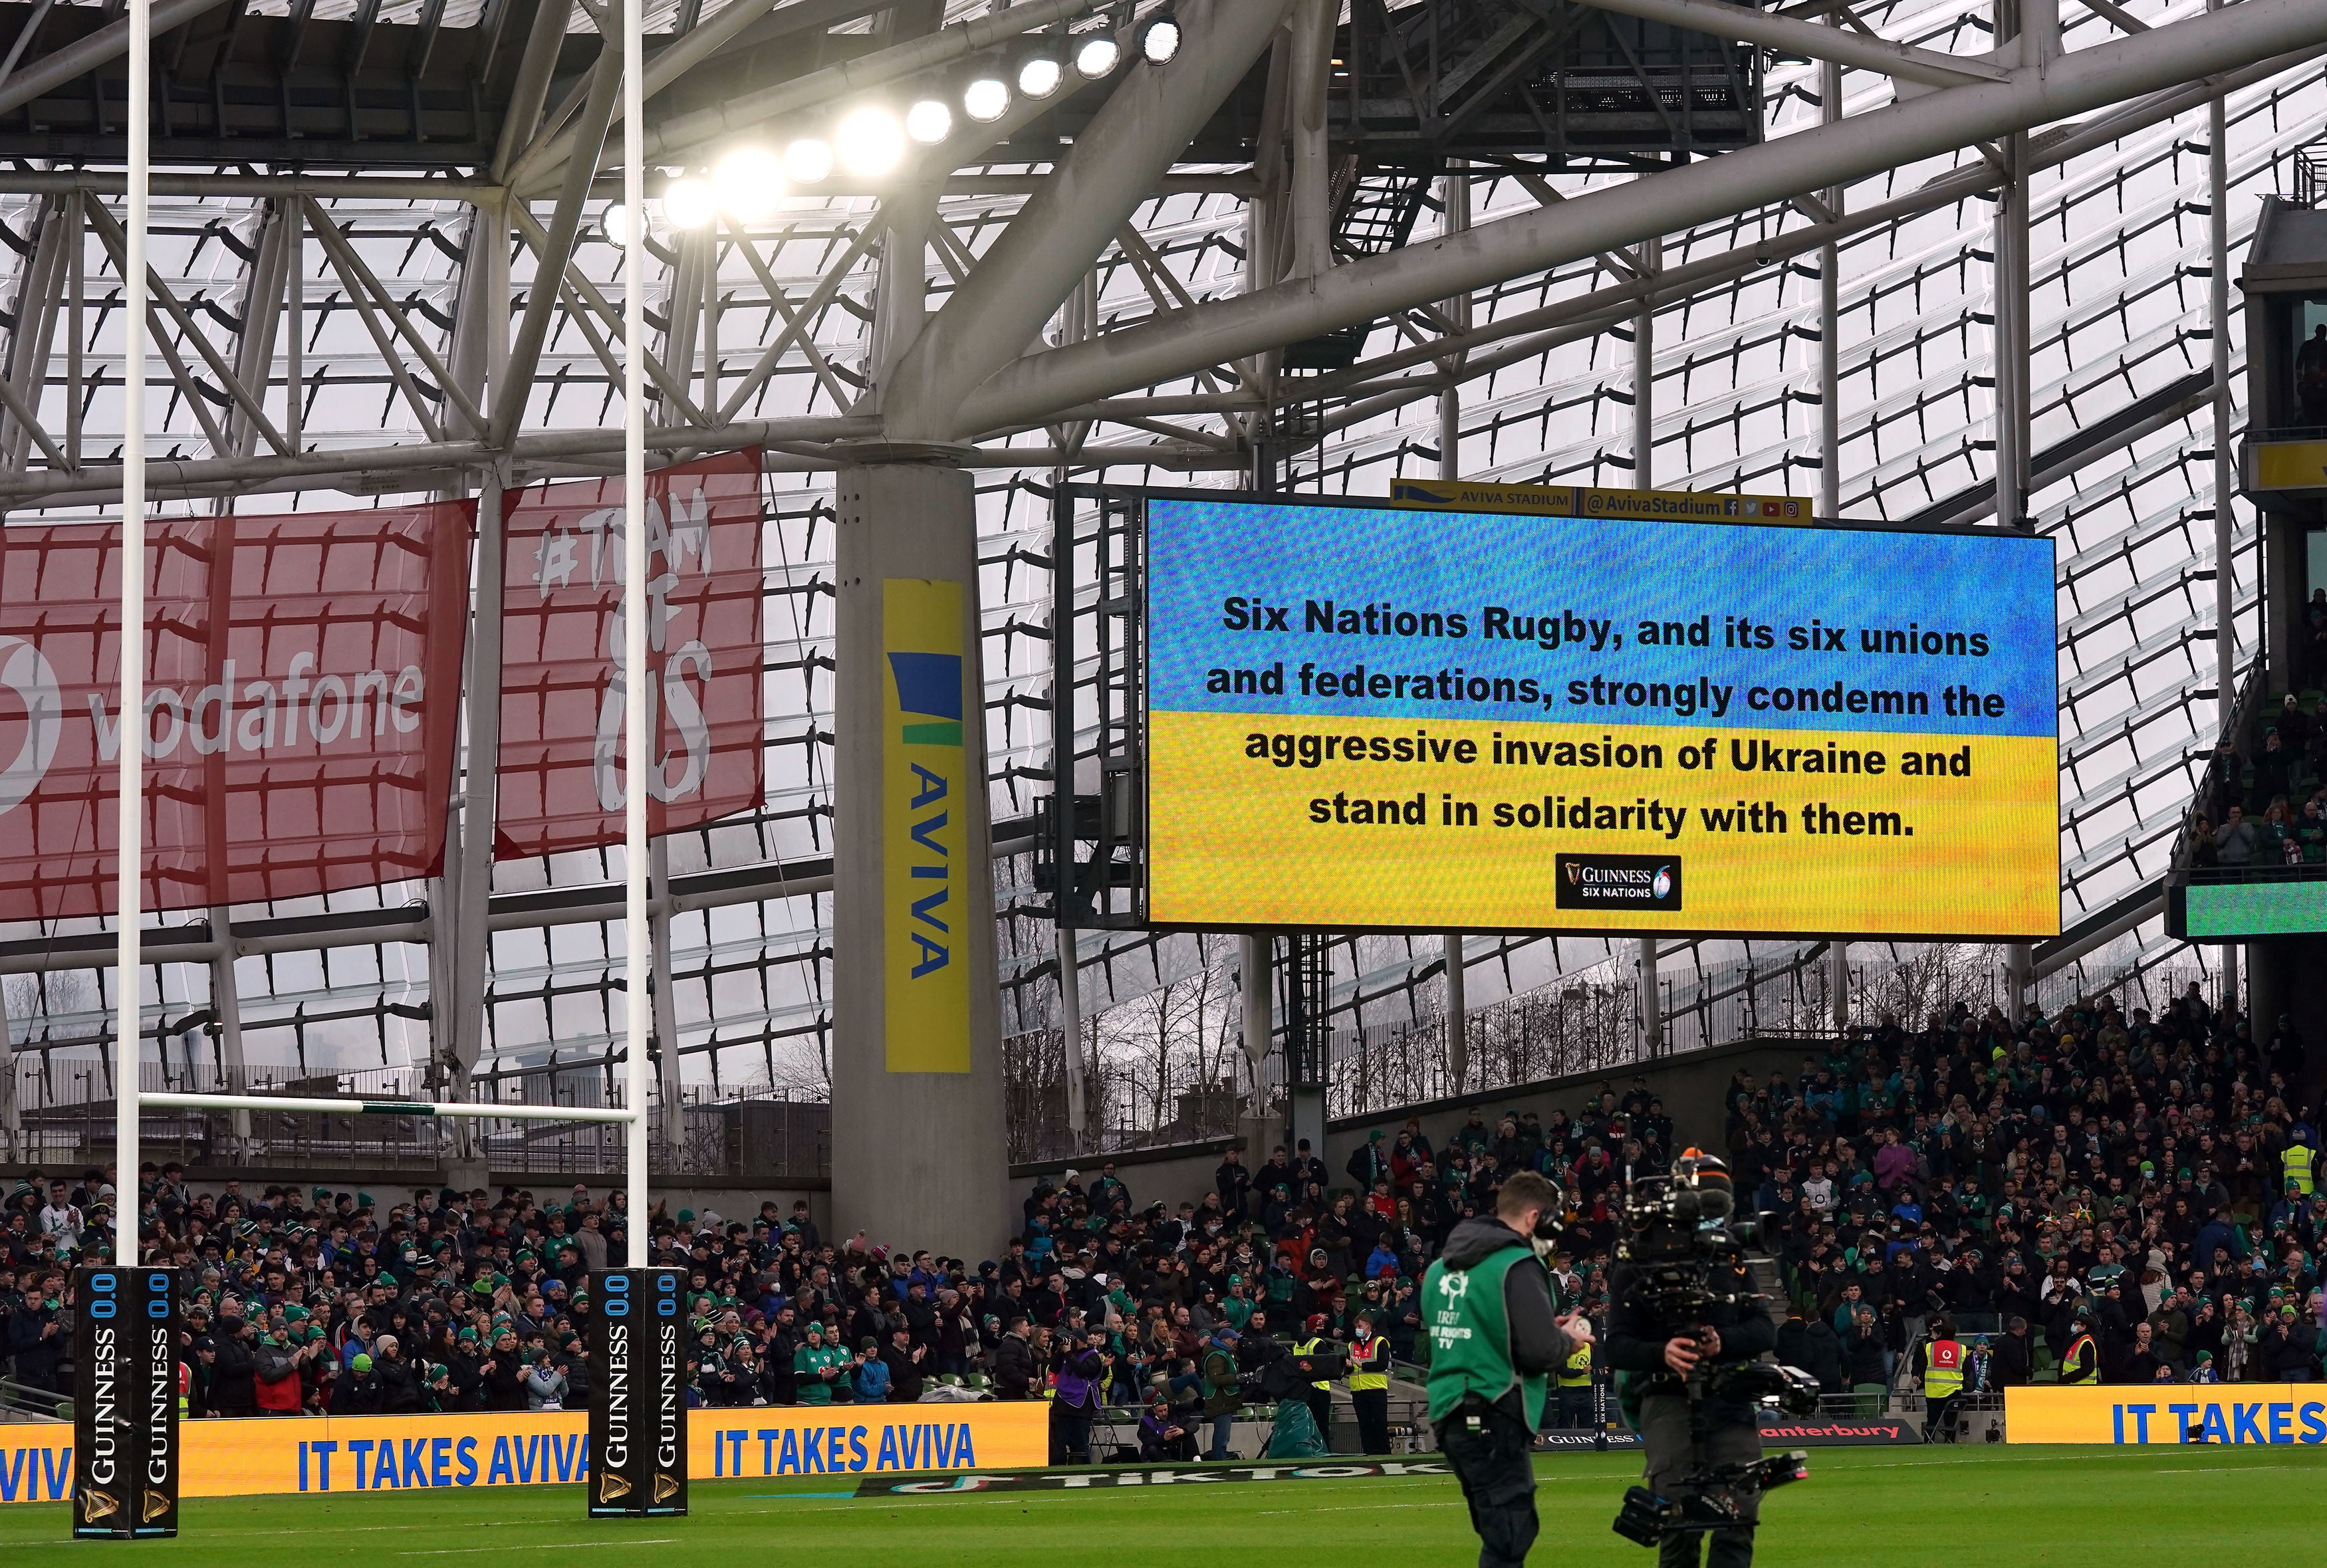 A message in support of Ukraine is shown inside the stadium before the match